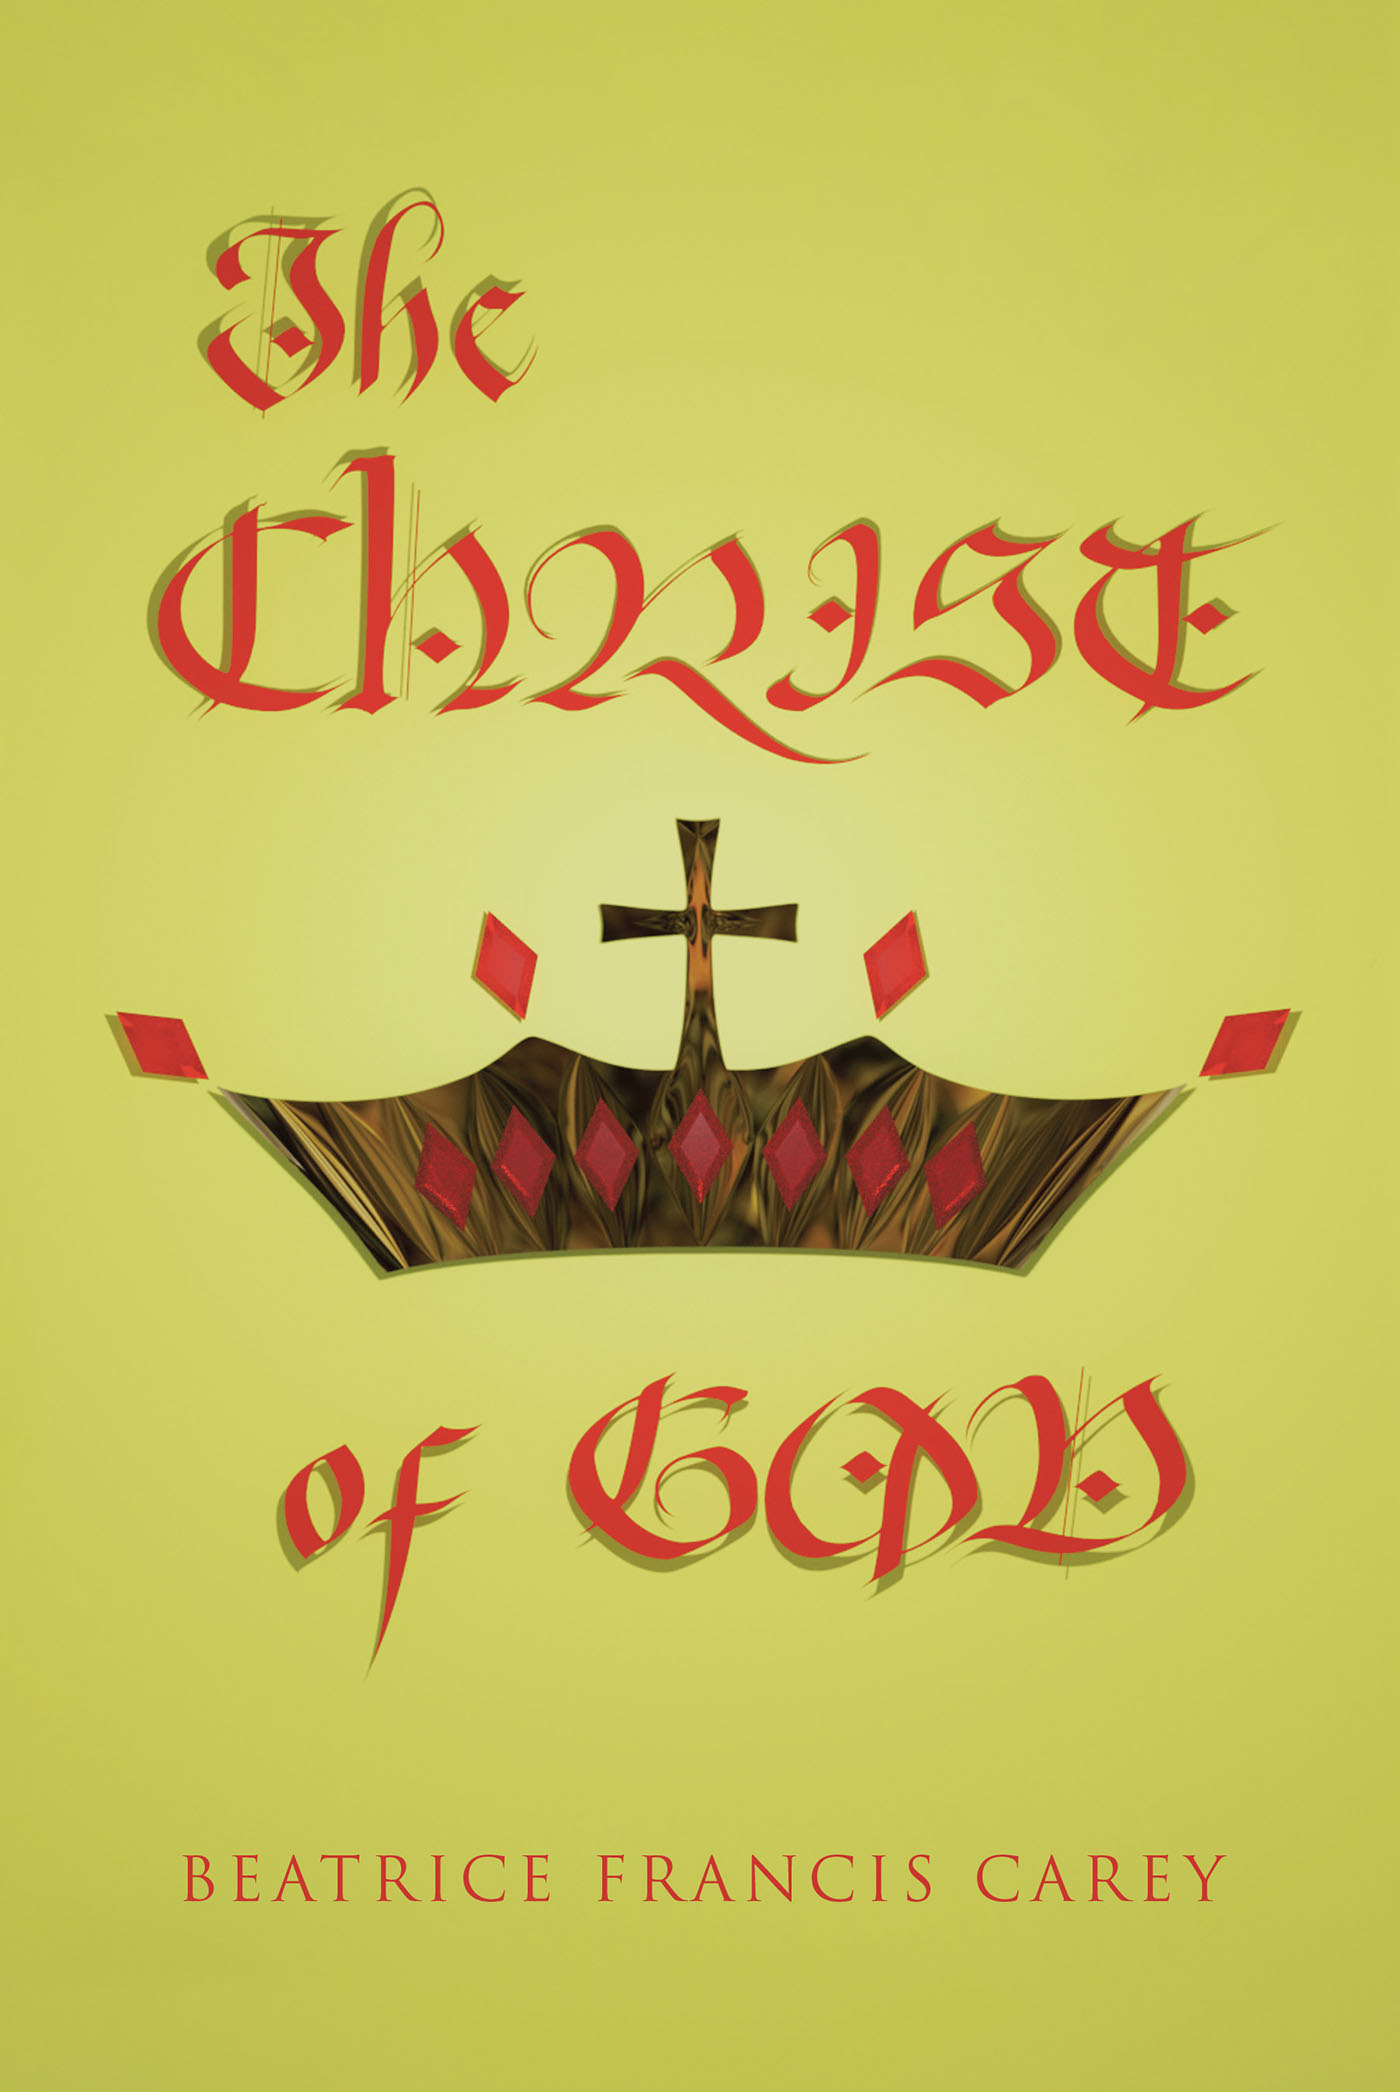 Author Beatrice Francis Carey’s New Book, "The Christ of God," Shares and Explores Biblical Scripture to Remind Readers of the Importance of God’s Word